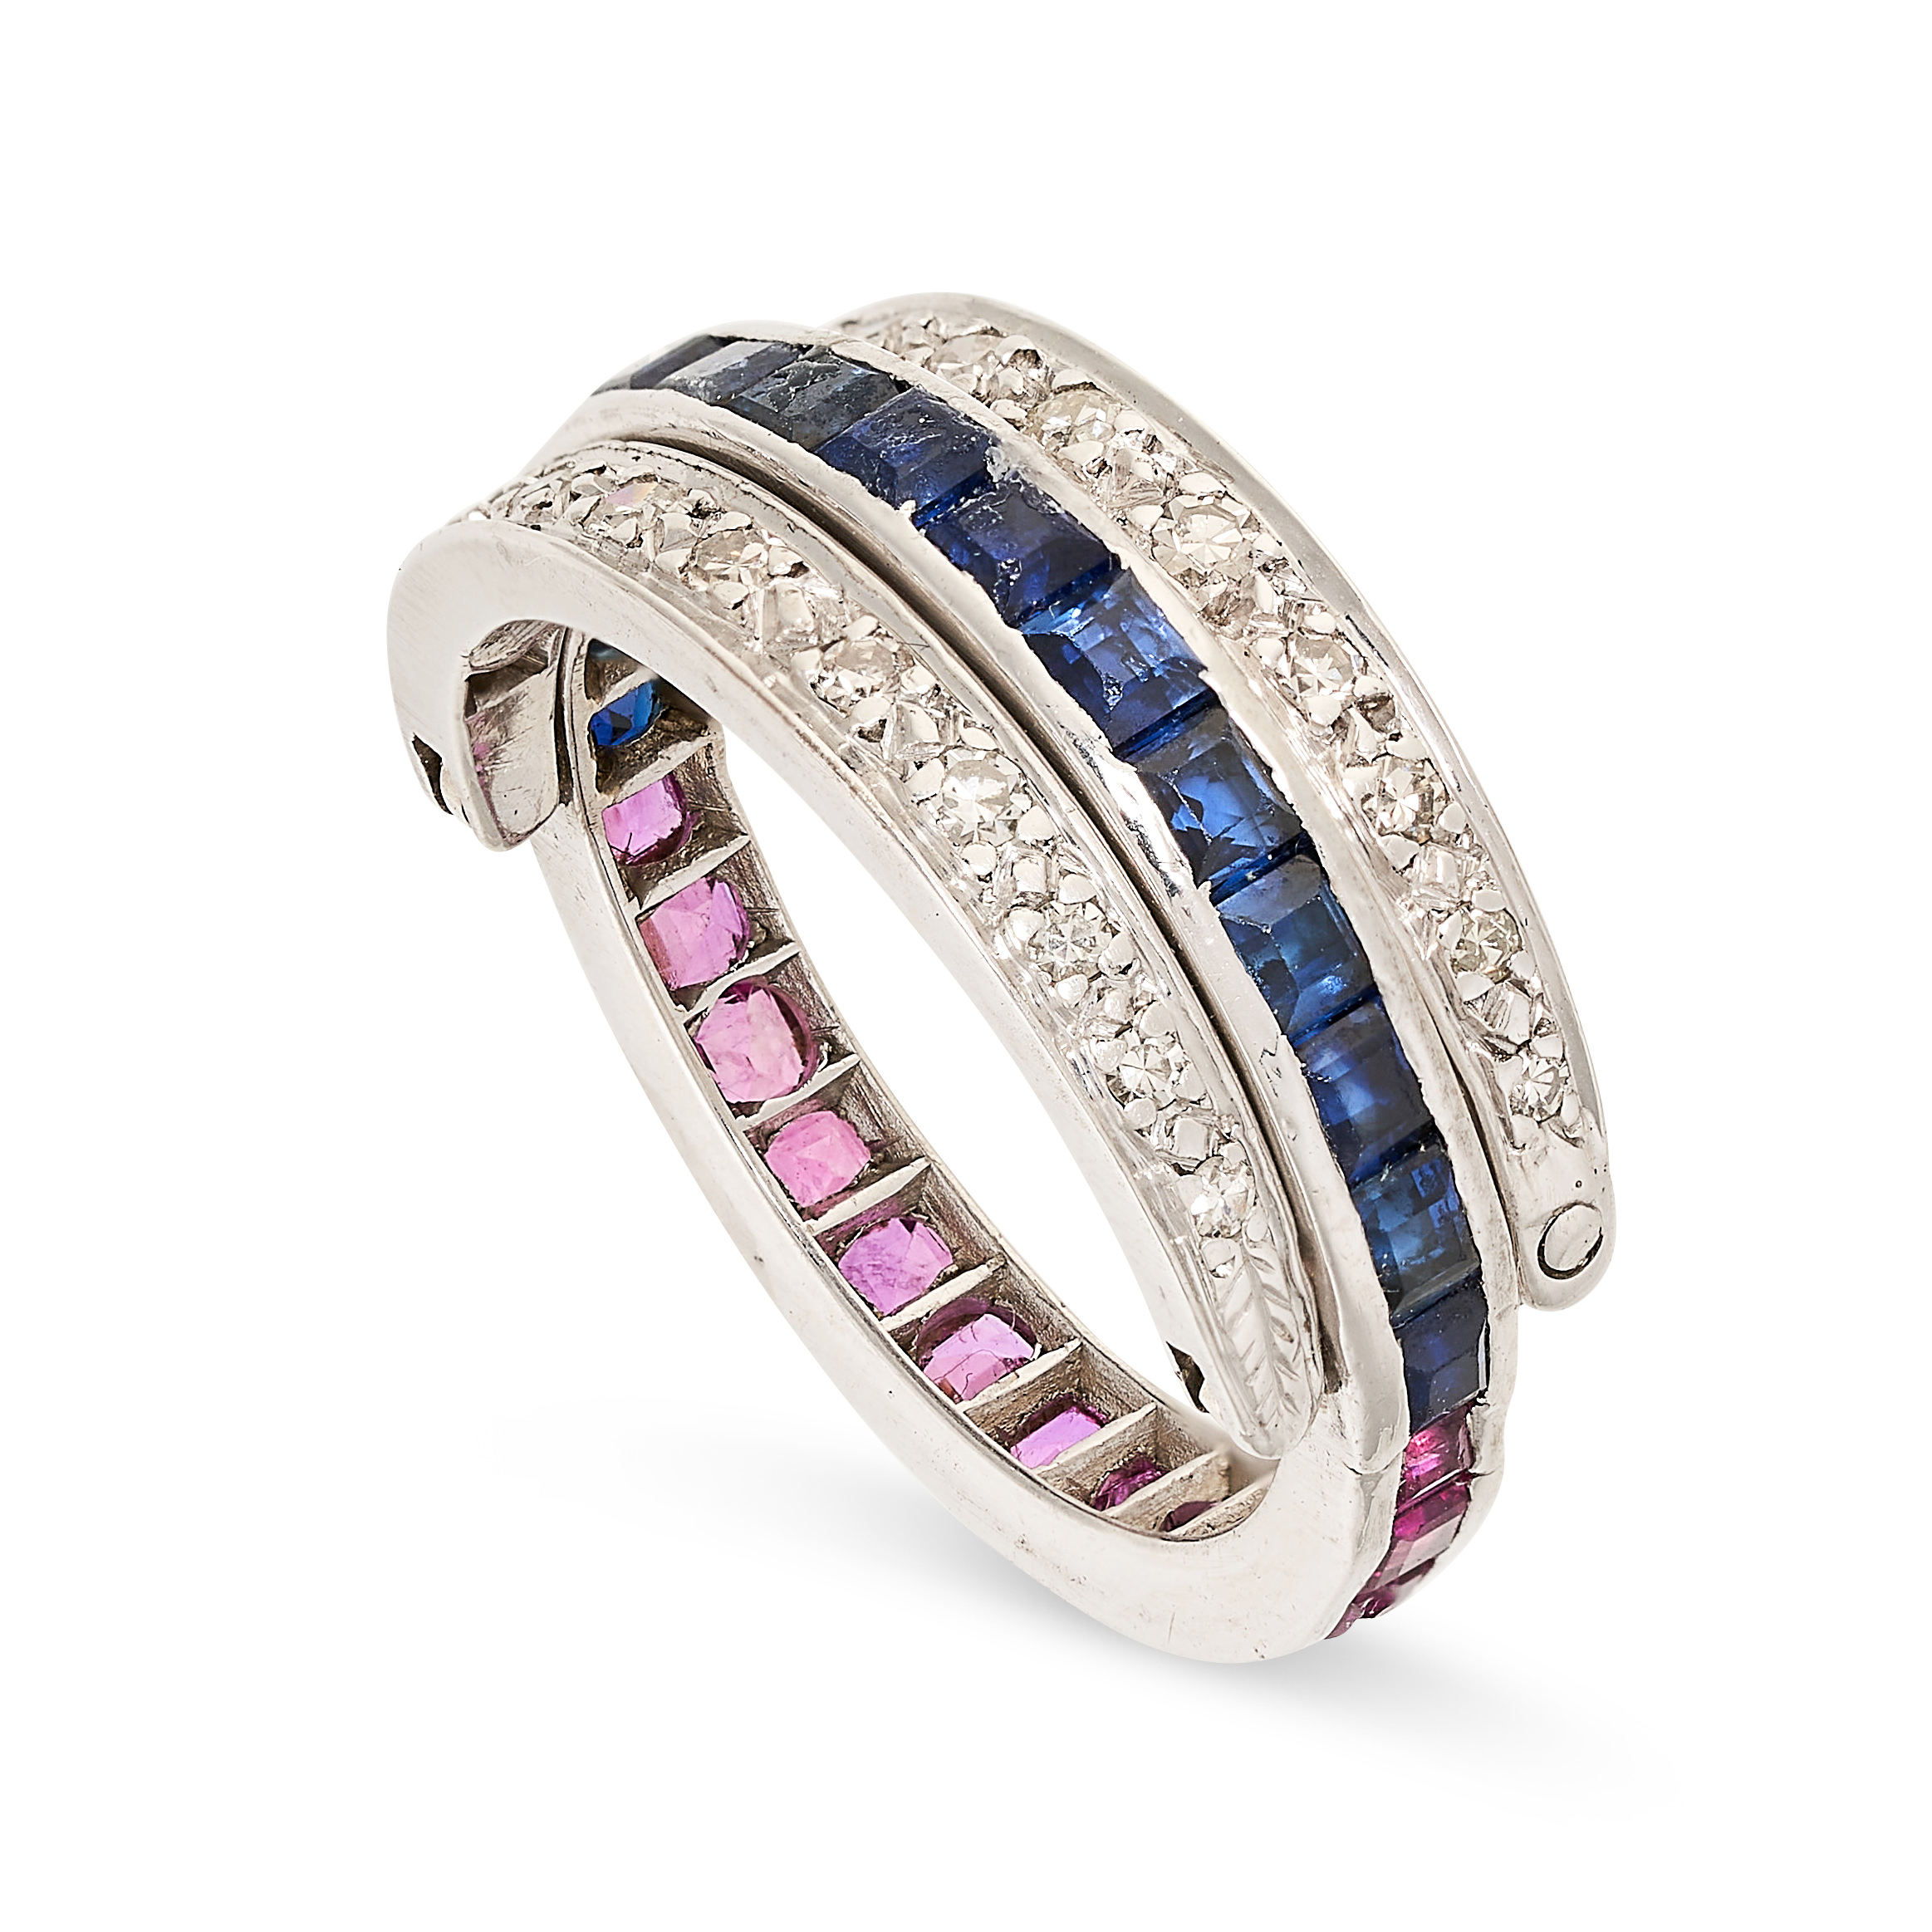 A DIAMOND, RUBY AND SAPPHIRE REVERSIBLE ETERNITY BAND RING the band set all around with a single row - Image 2 of 2